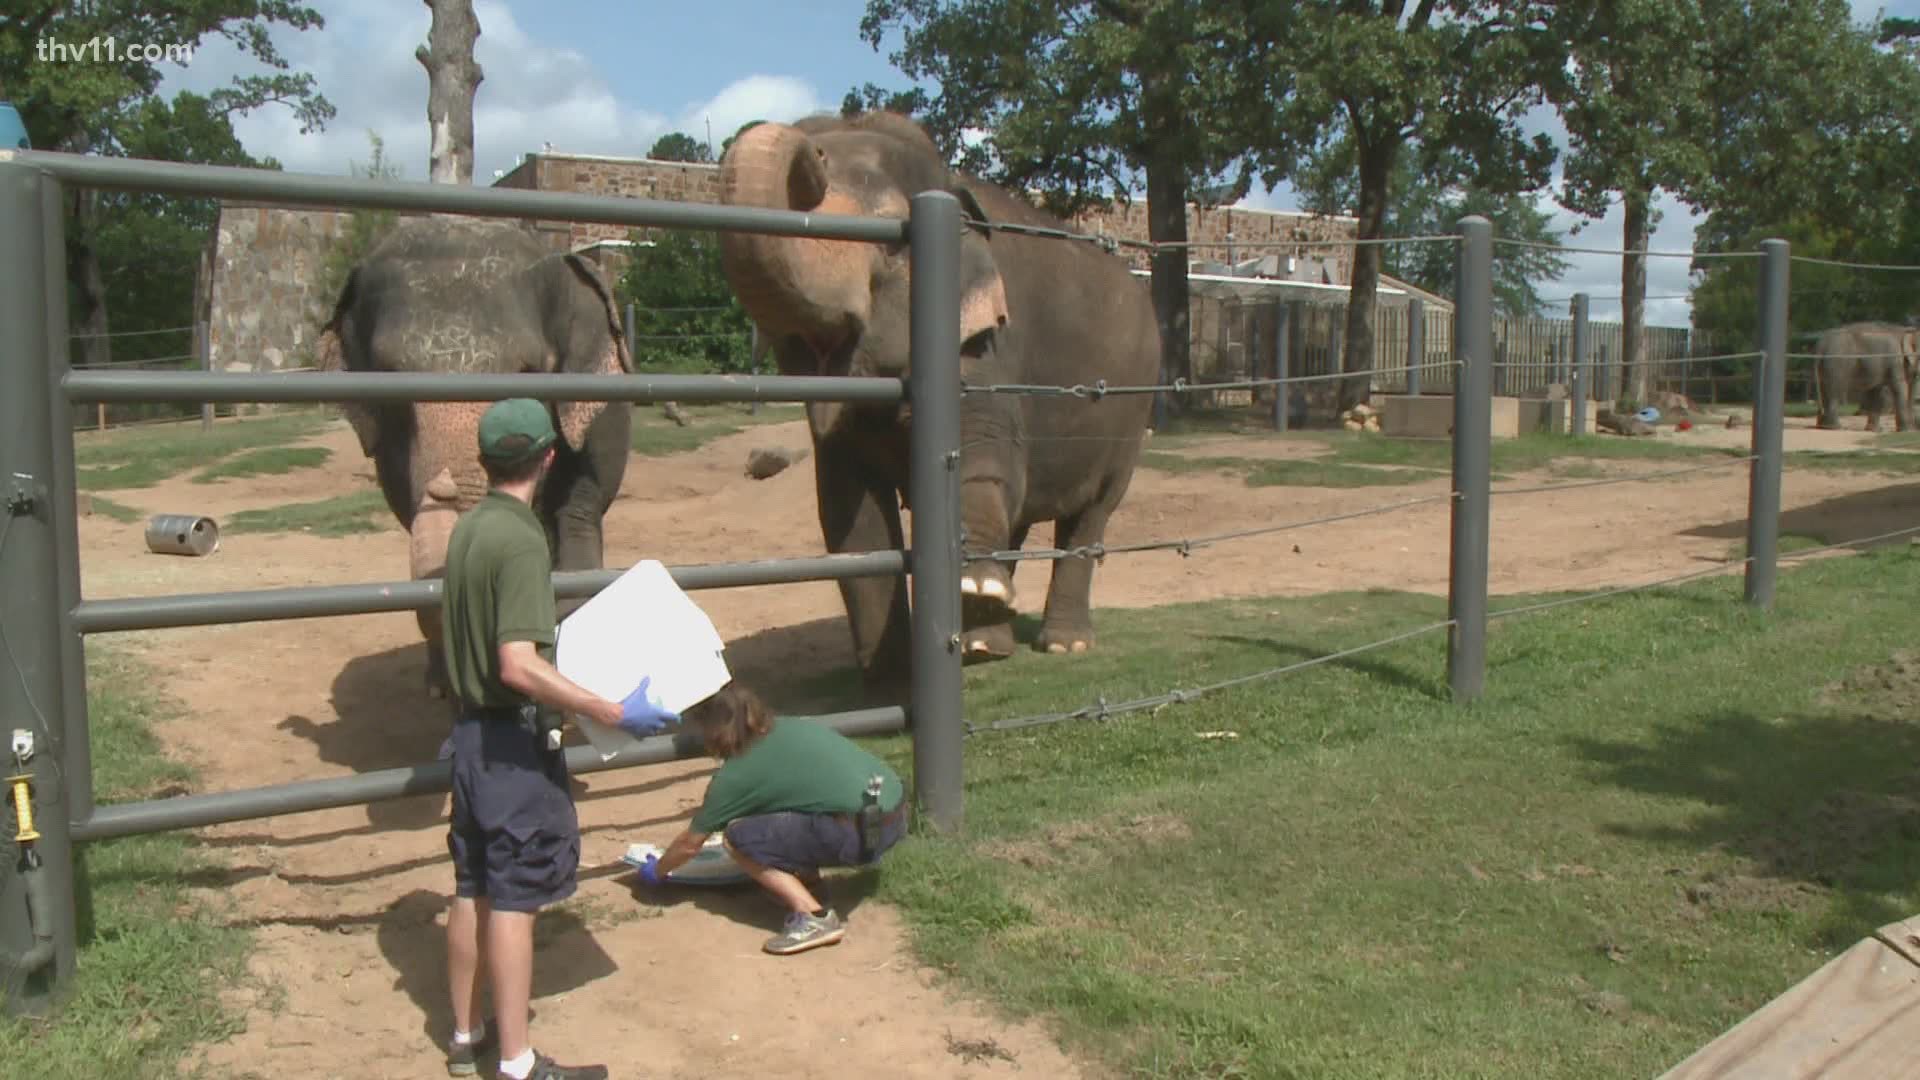 Elephants at the Little Rock Zoo will be front and center thanks to a brand new sponsorship.